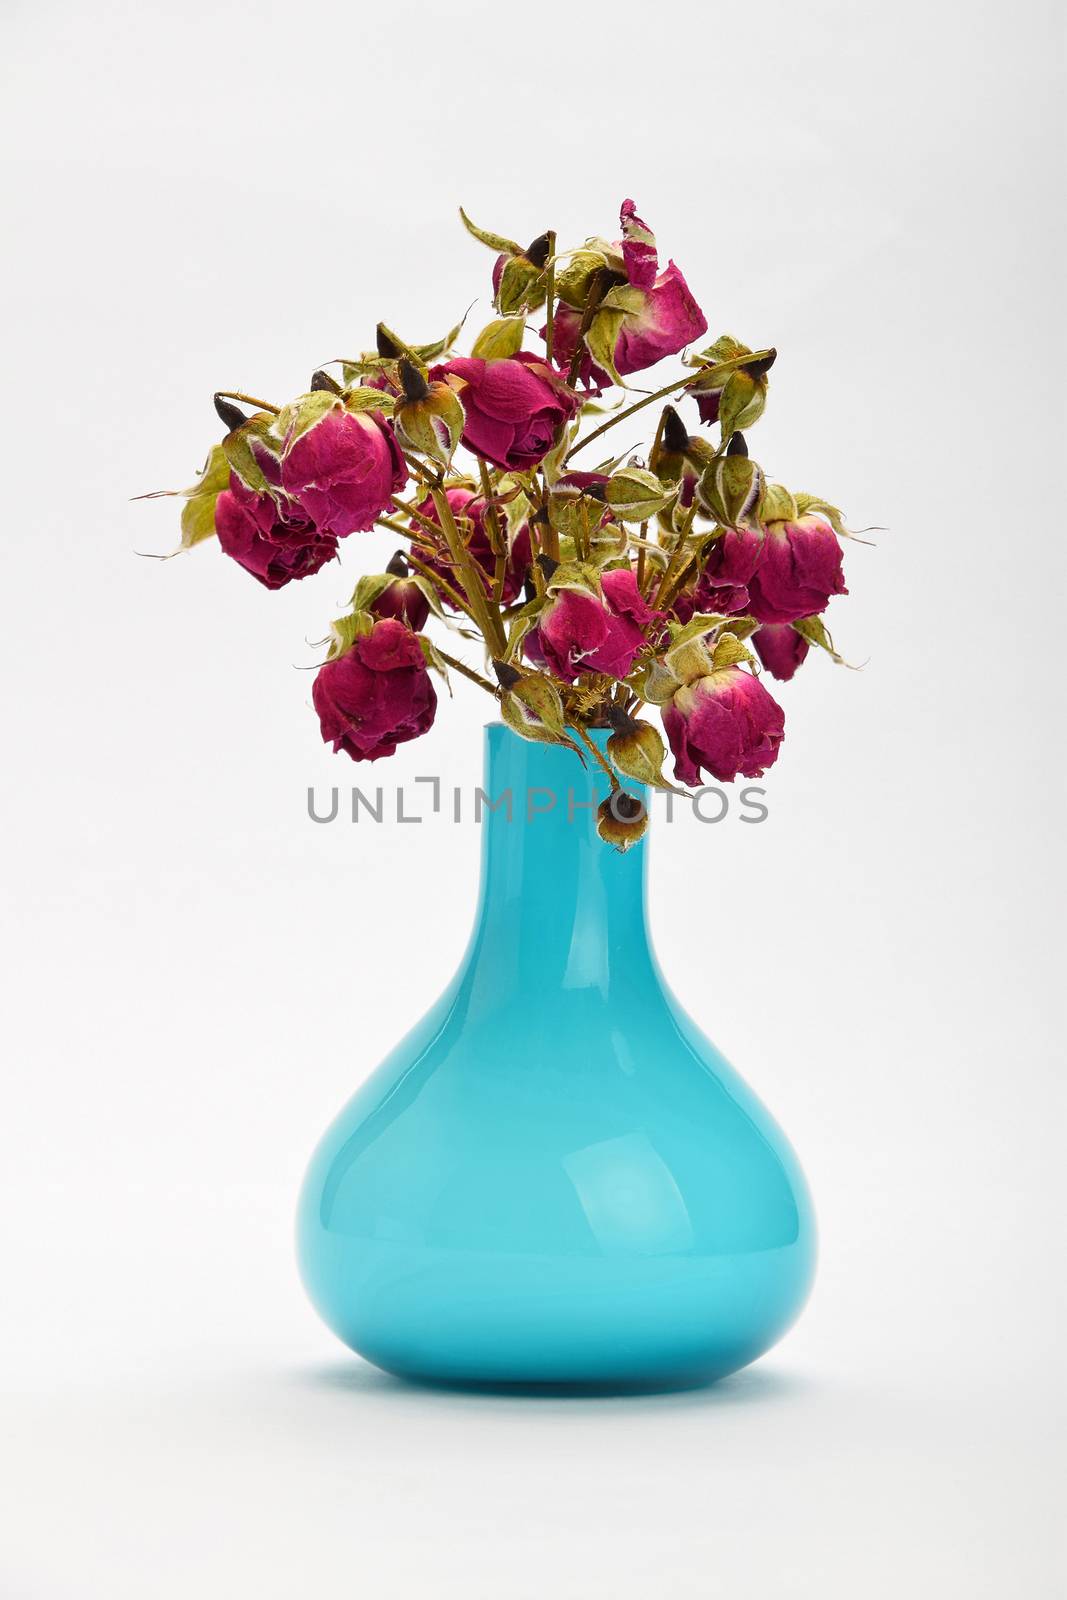 Dried-up red roses in a blue vase isolated on white background w by BreakingTheWalls